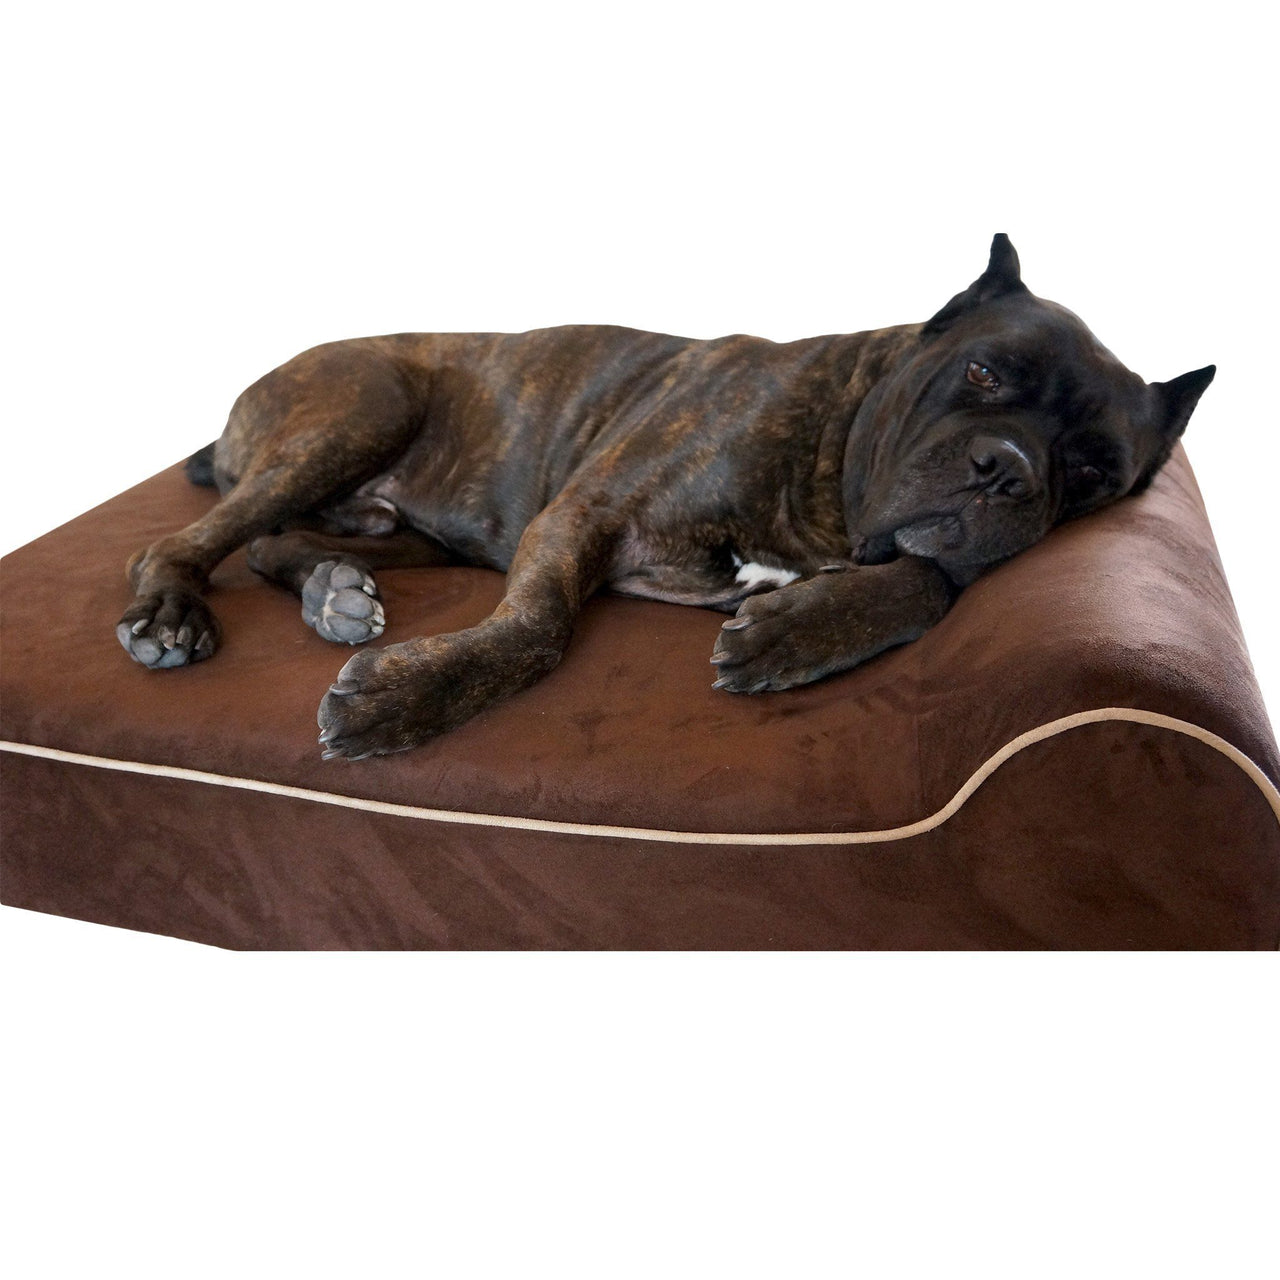 Infrared Cover Standard Bully Bed Covers Bullybeds.com Medium $45 Chocolate 